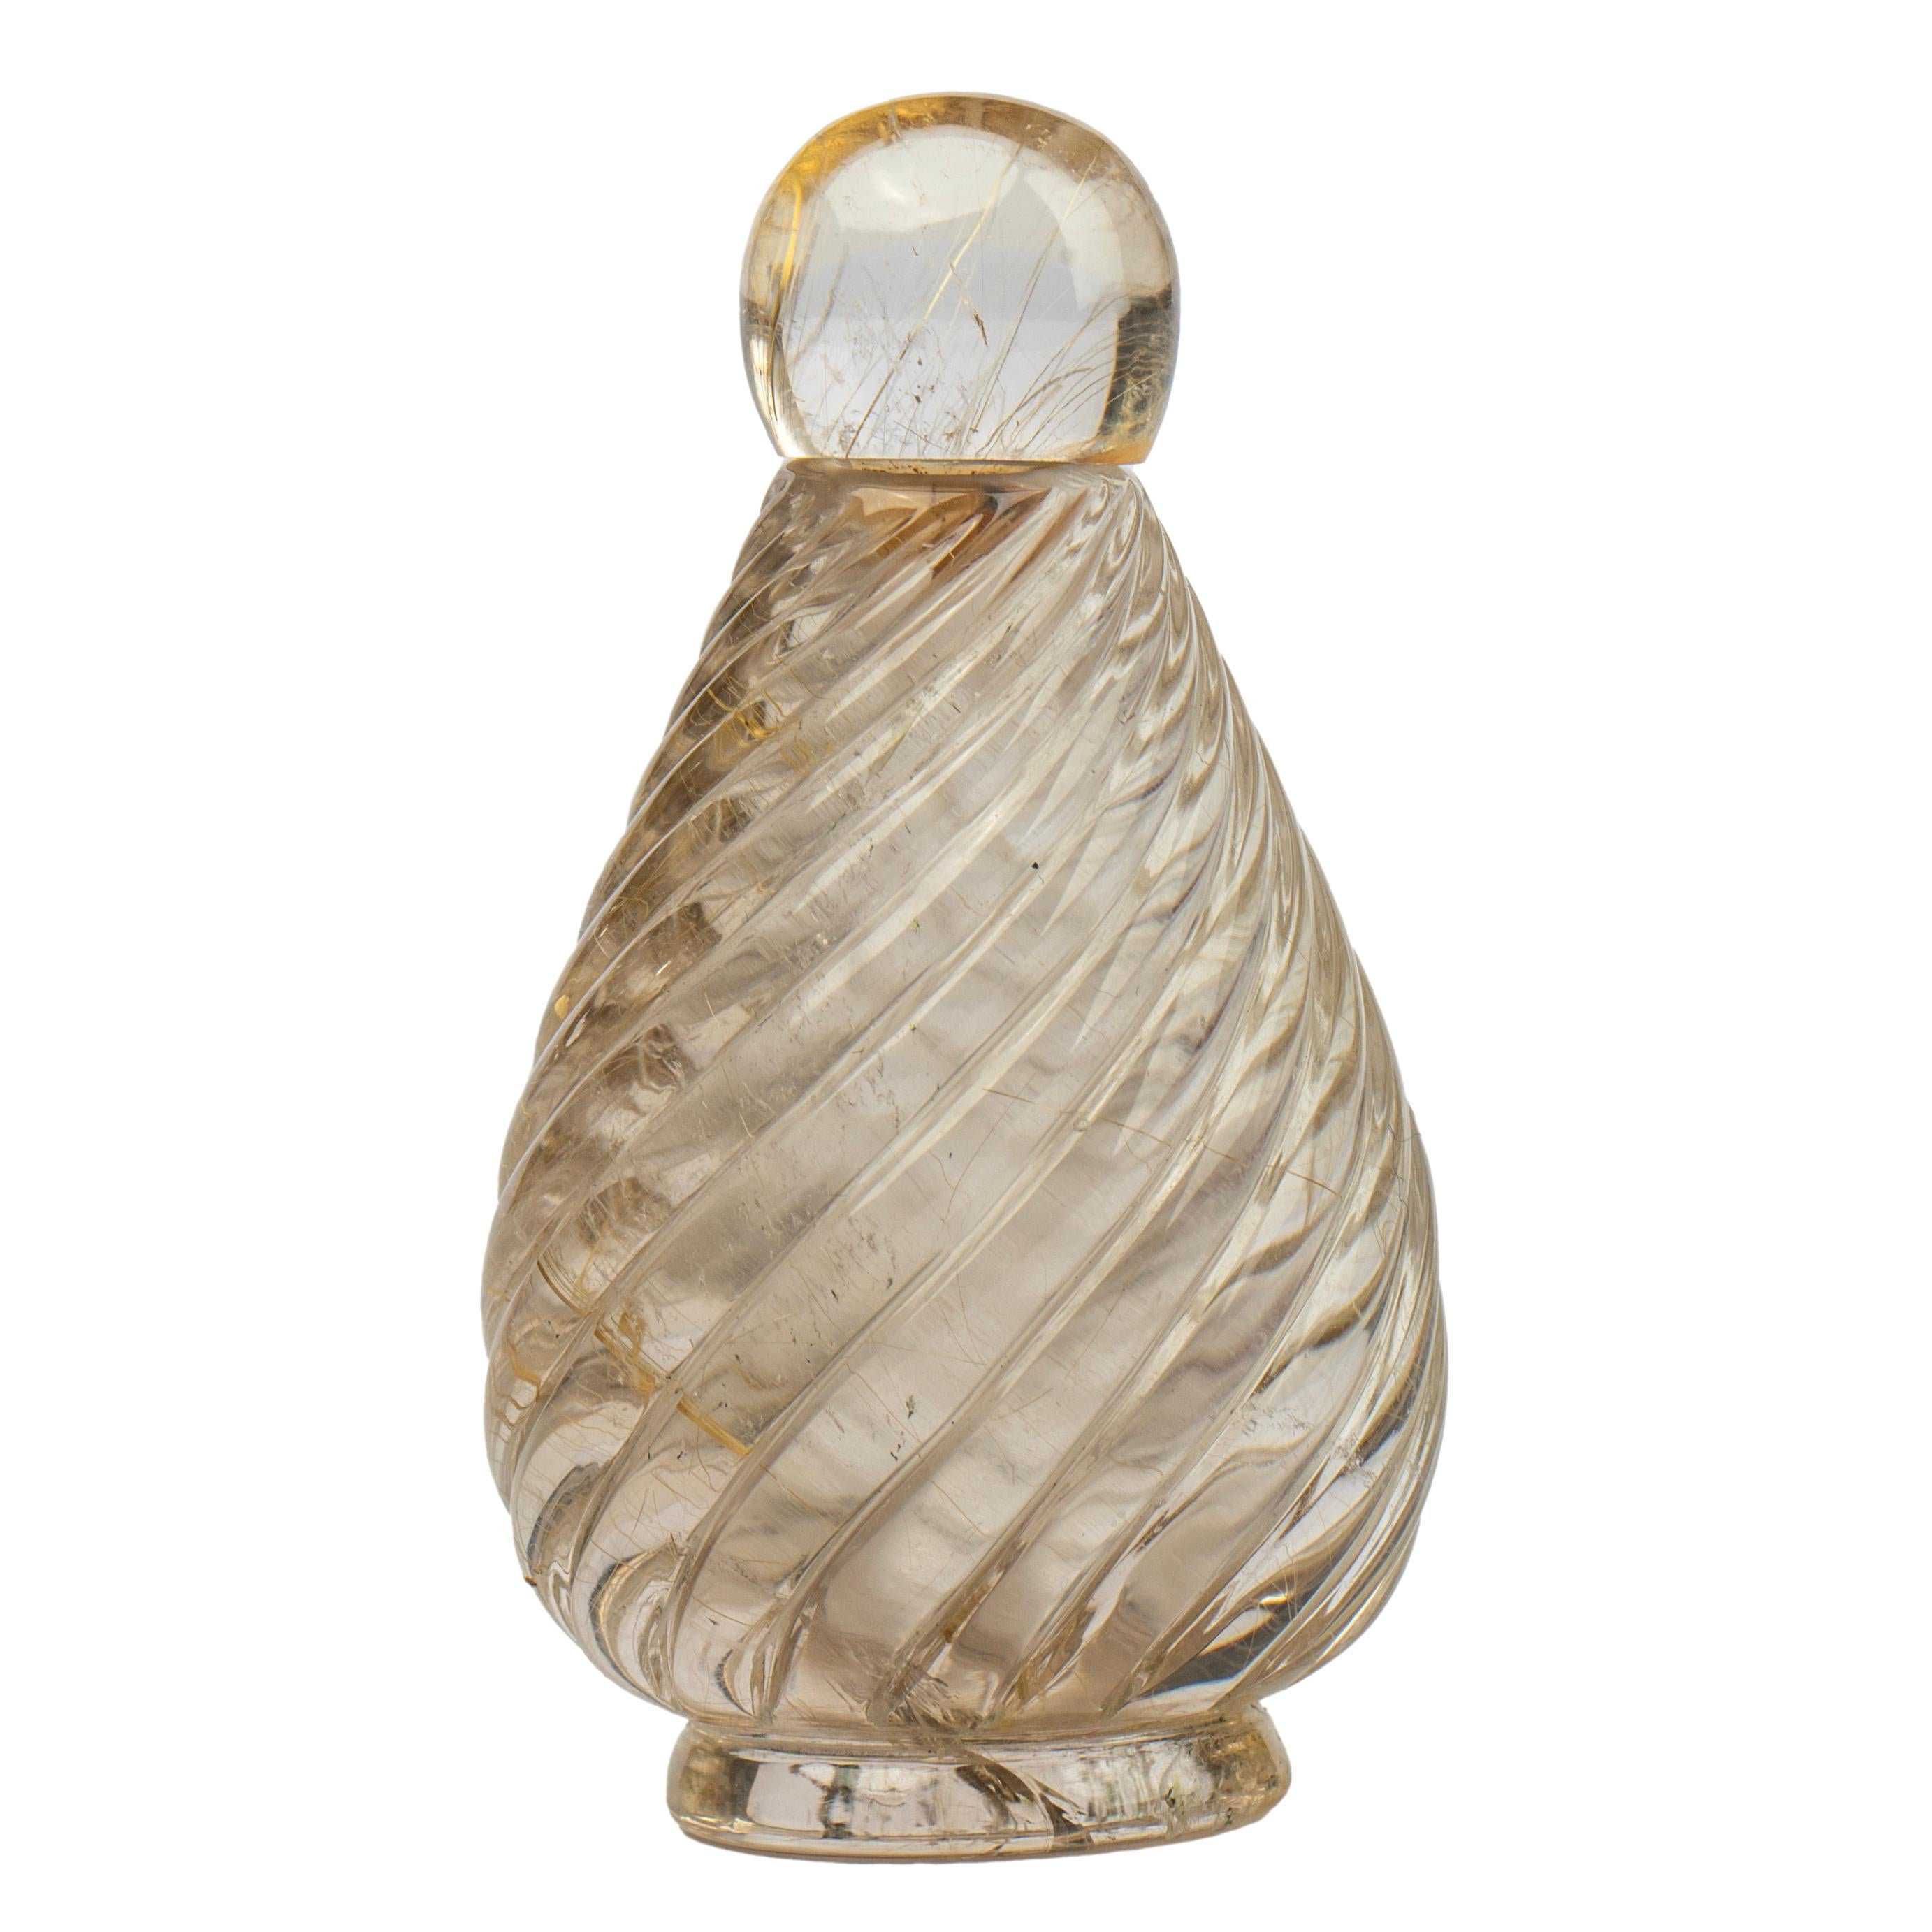 Pear Cut Hand-carved Rutile Quartz Perfume Bottle by Abdul Zuber For Sale